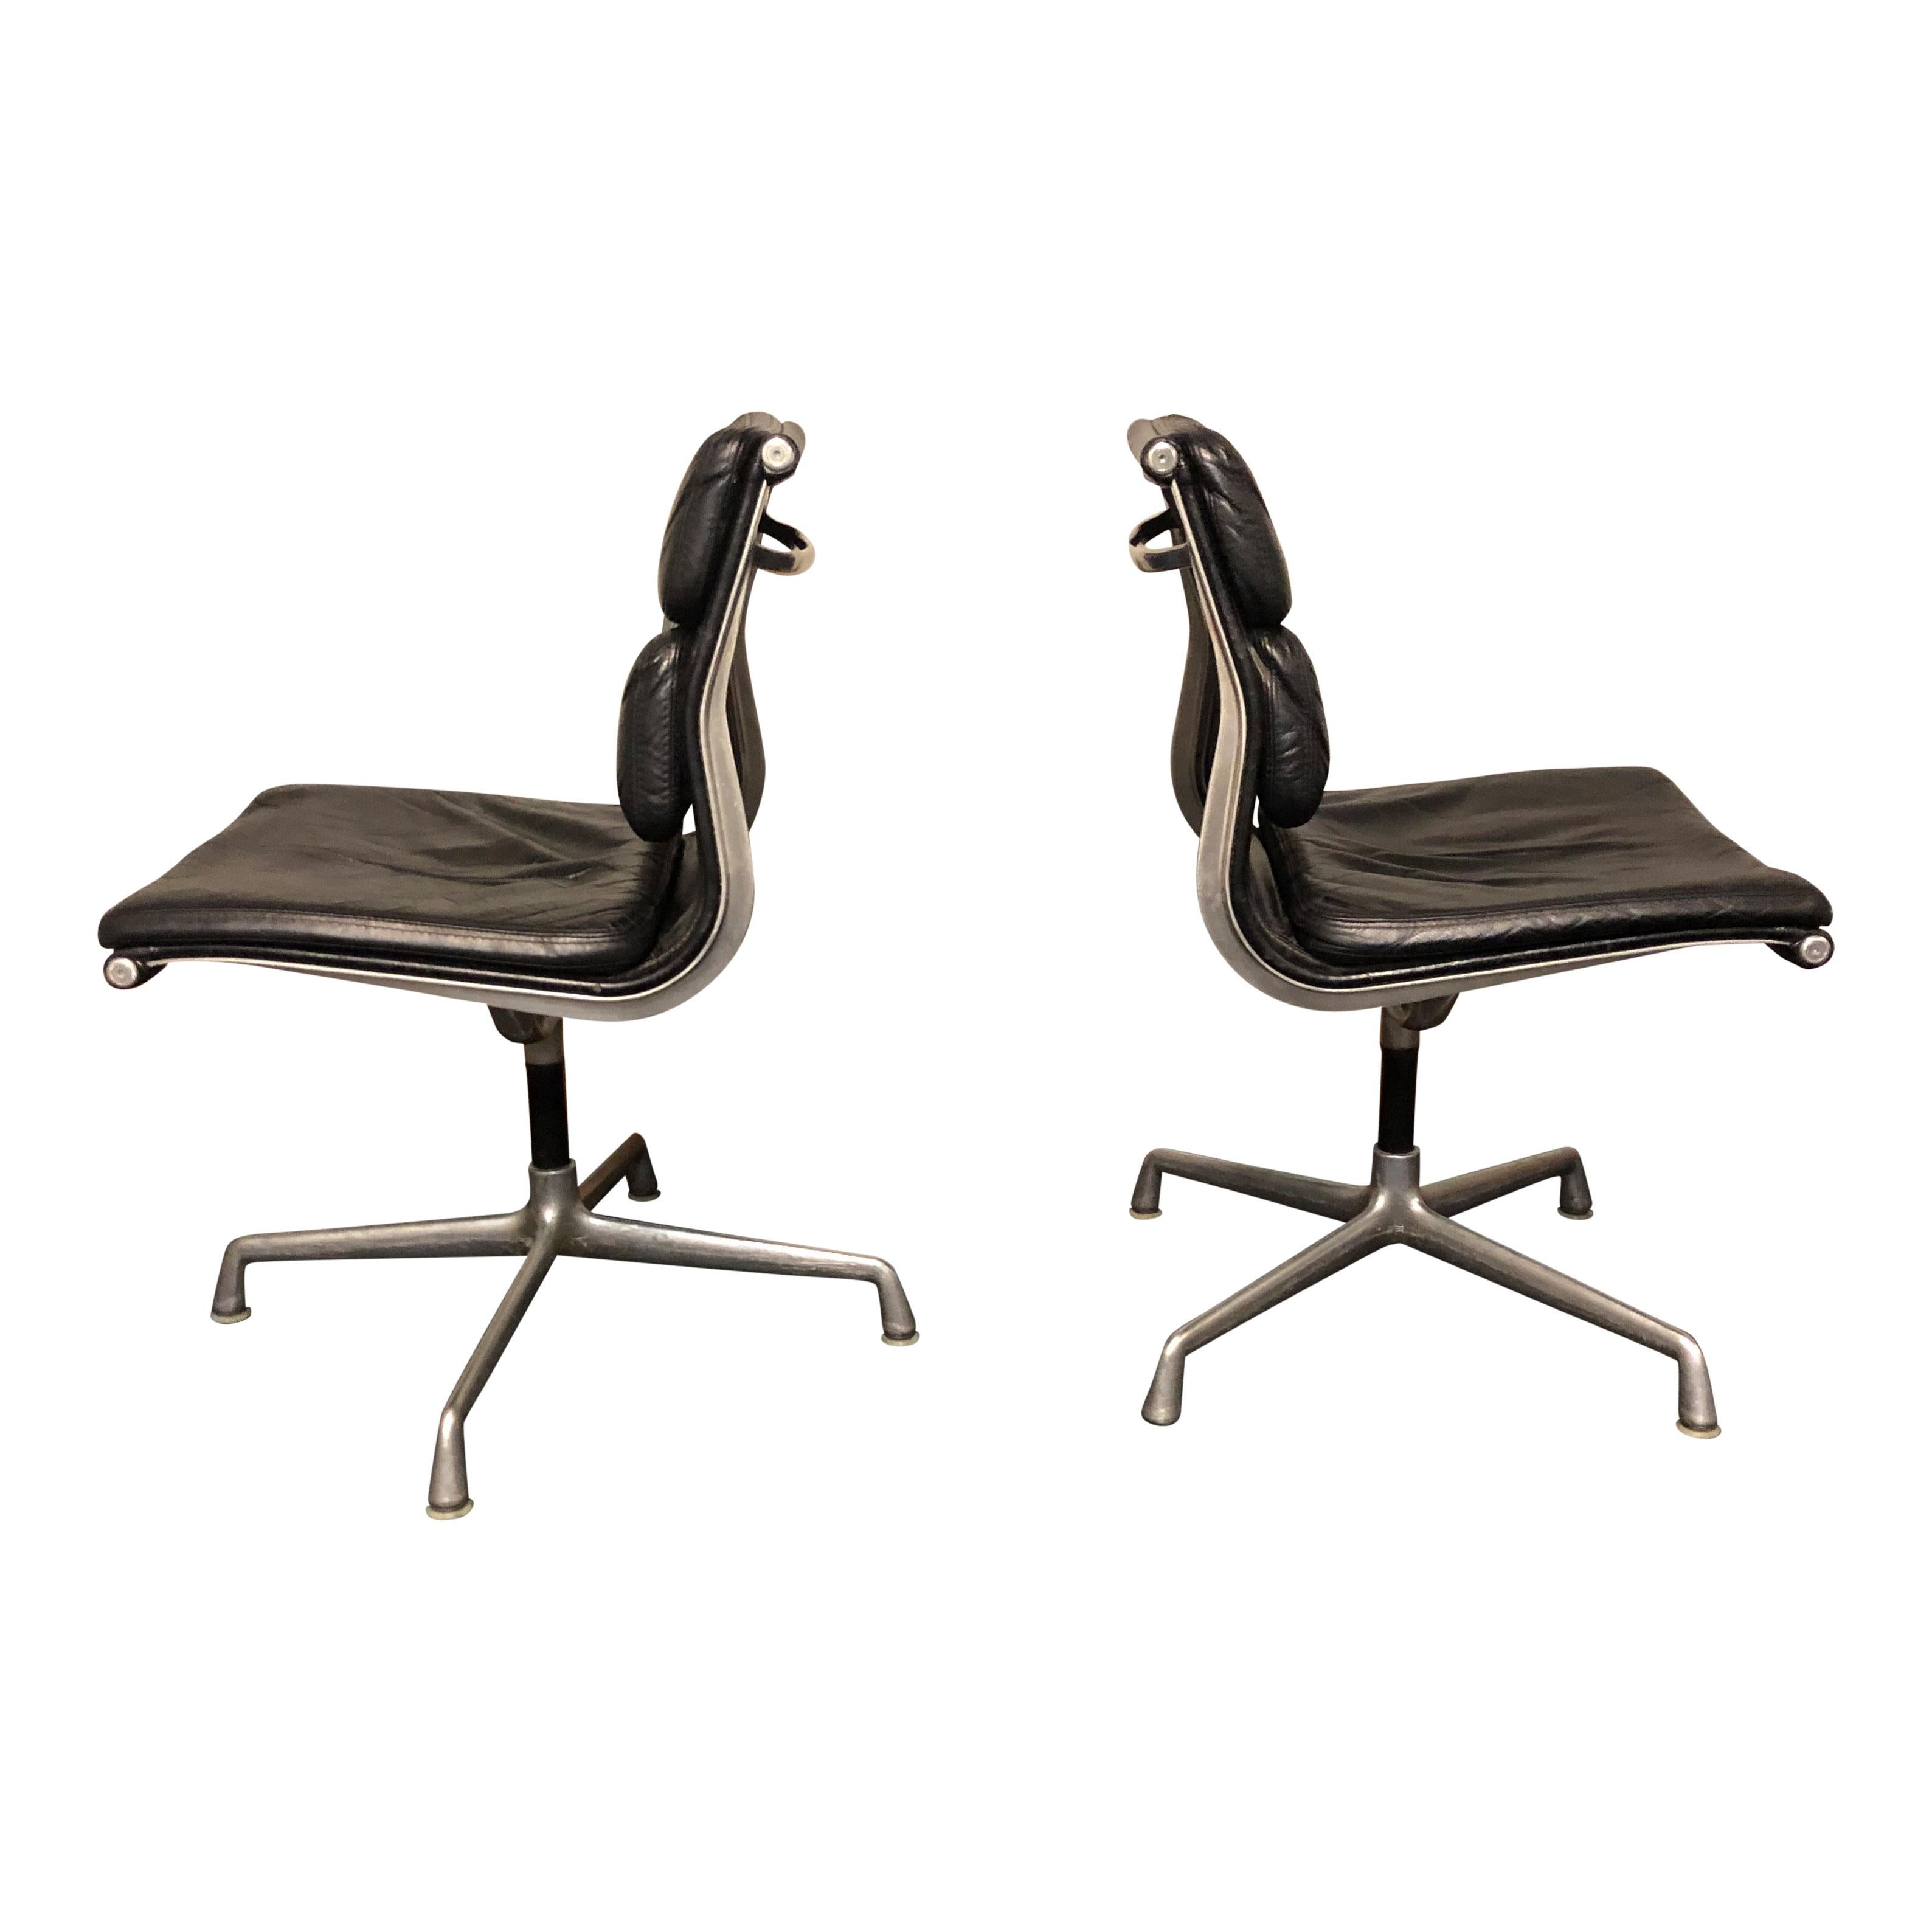 For your consideration are authentic Eames for Herman Miller vintage soft pad chairs in black leather. 

These authentic vintage examples are icons of Mid-Century Modern design. The chairs part of the Eames aluminium group designed for Herman